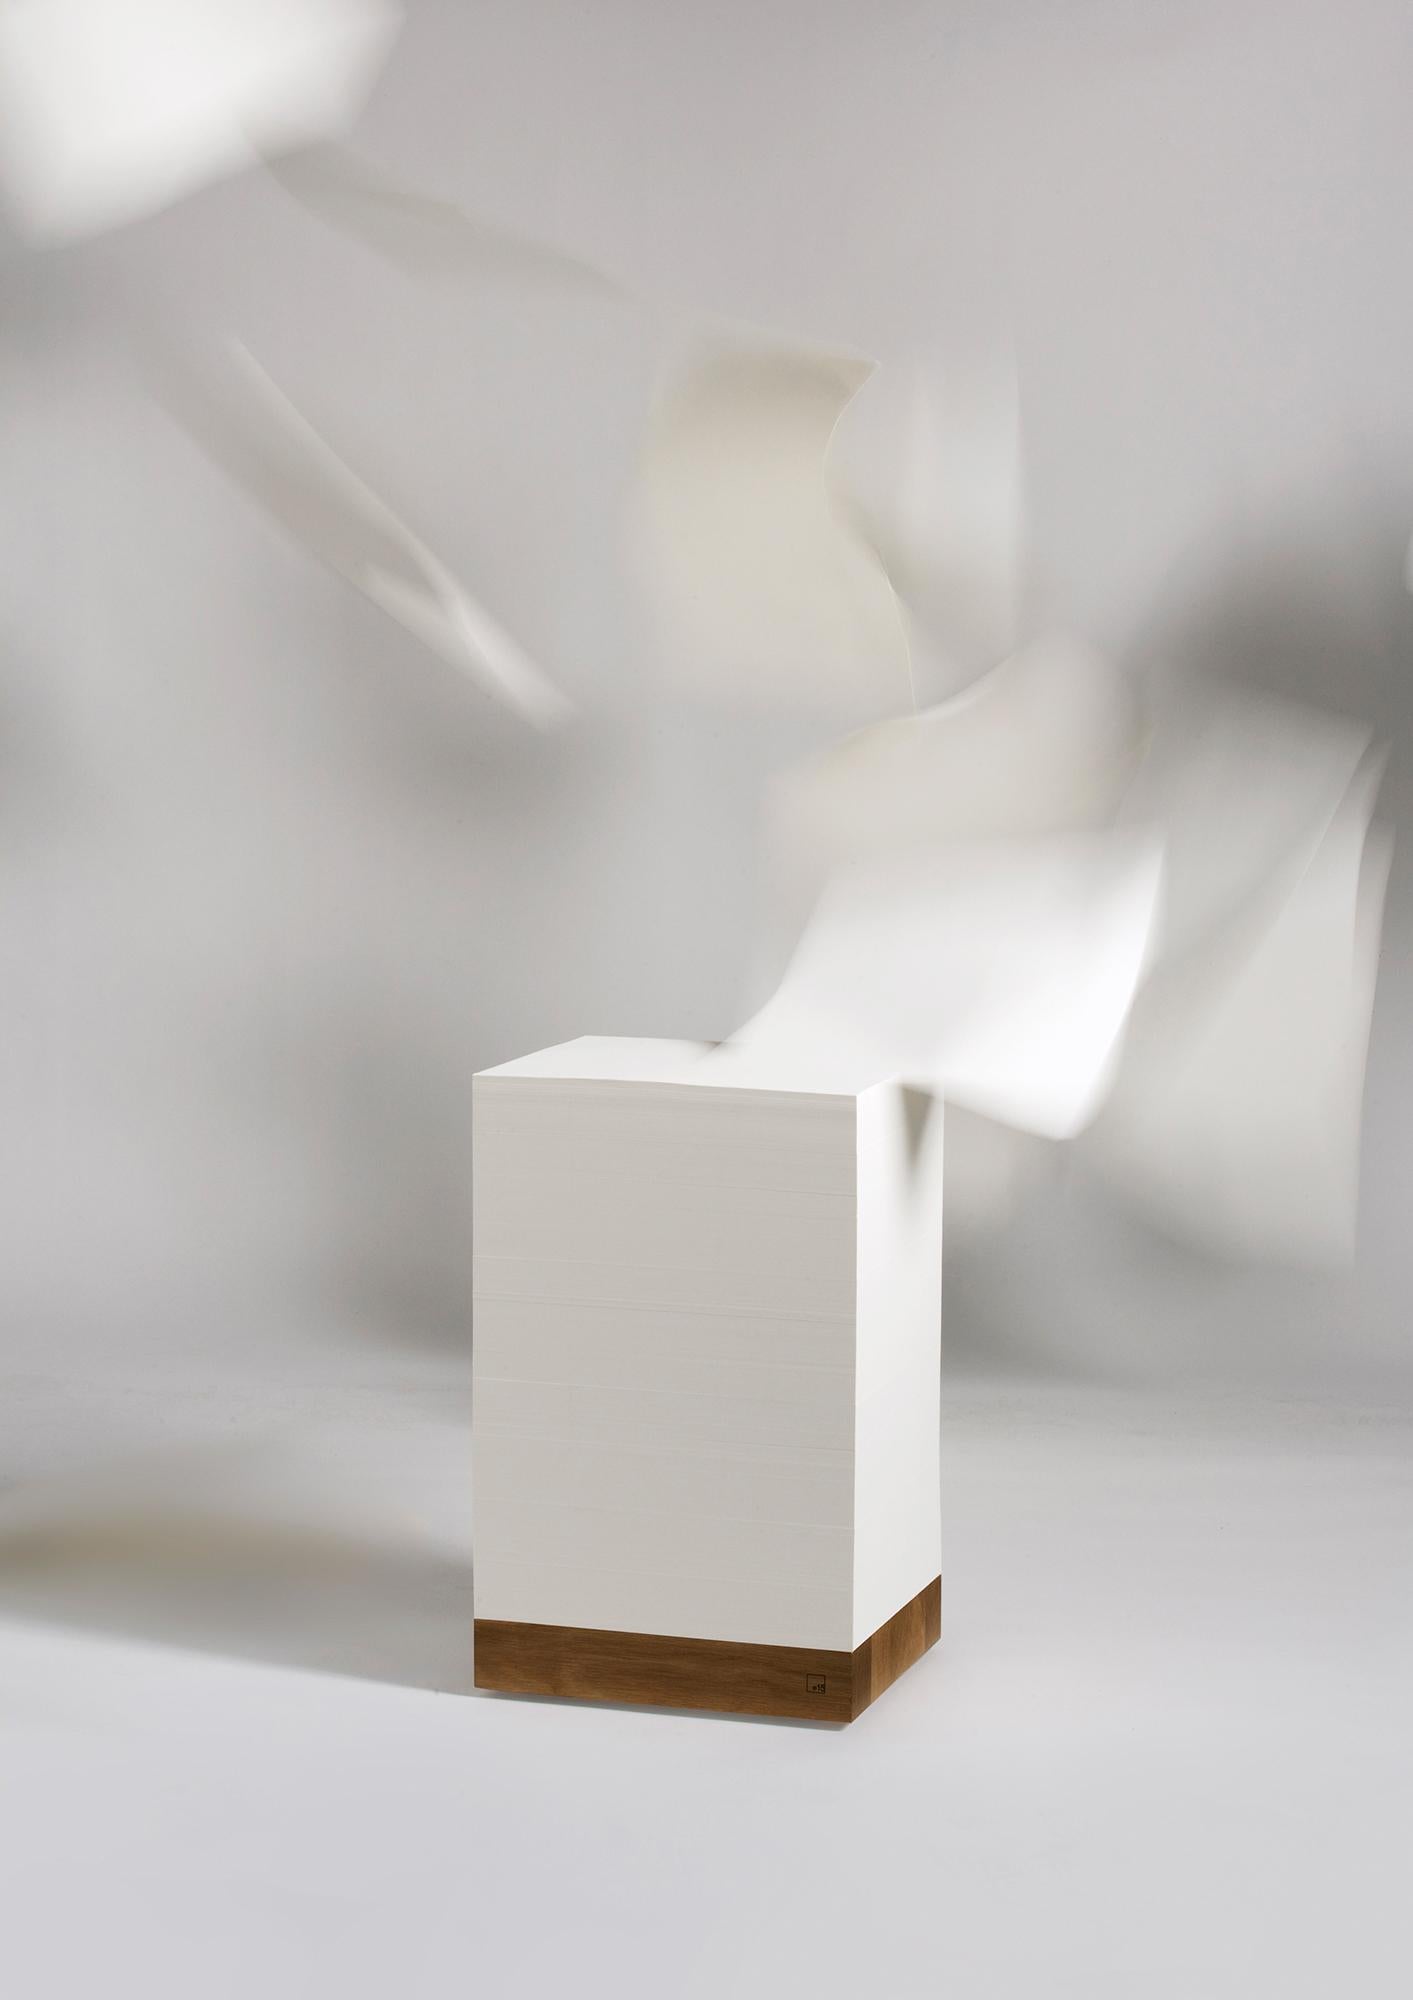 The Munken cube is sculpture, working tool and source of inspiration all in one. The form is pure at the same time flexible and consists of a monumental stack of Munken paper and a base of solid oak. From a 60 mm thick solid oak base by e15 “grow”